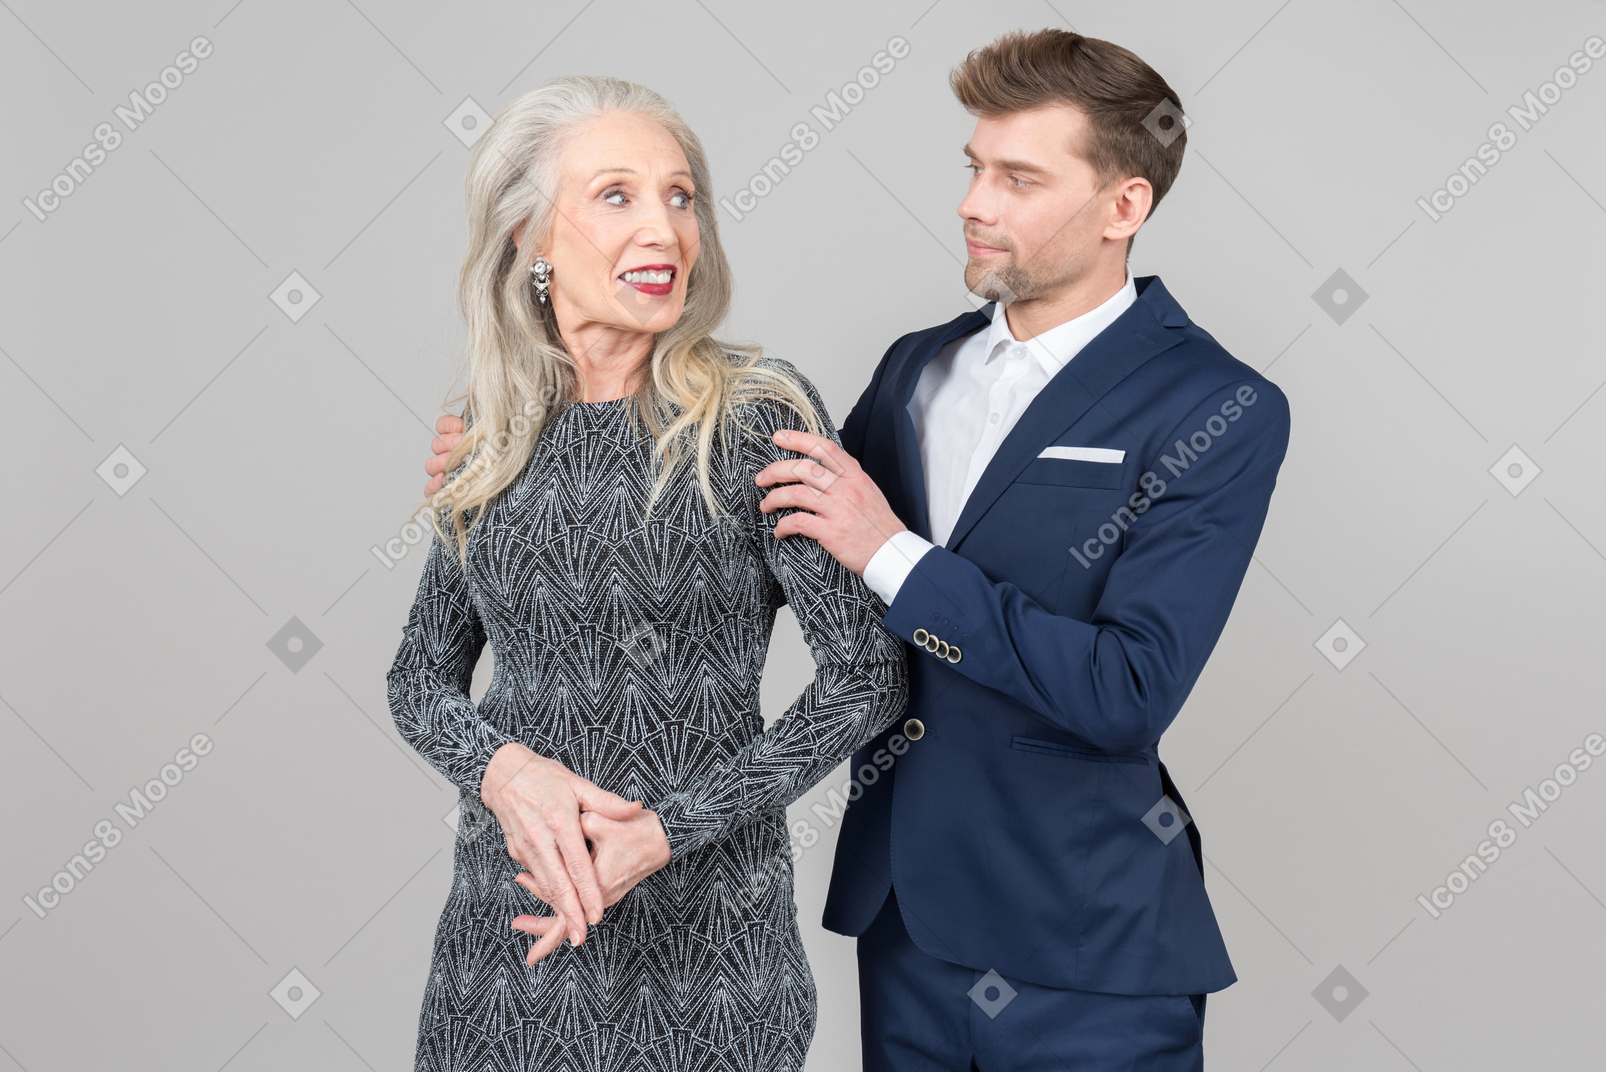 Old woman and her younger boyfriend standing close to each other